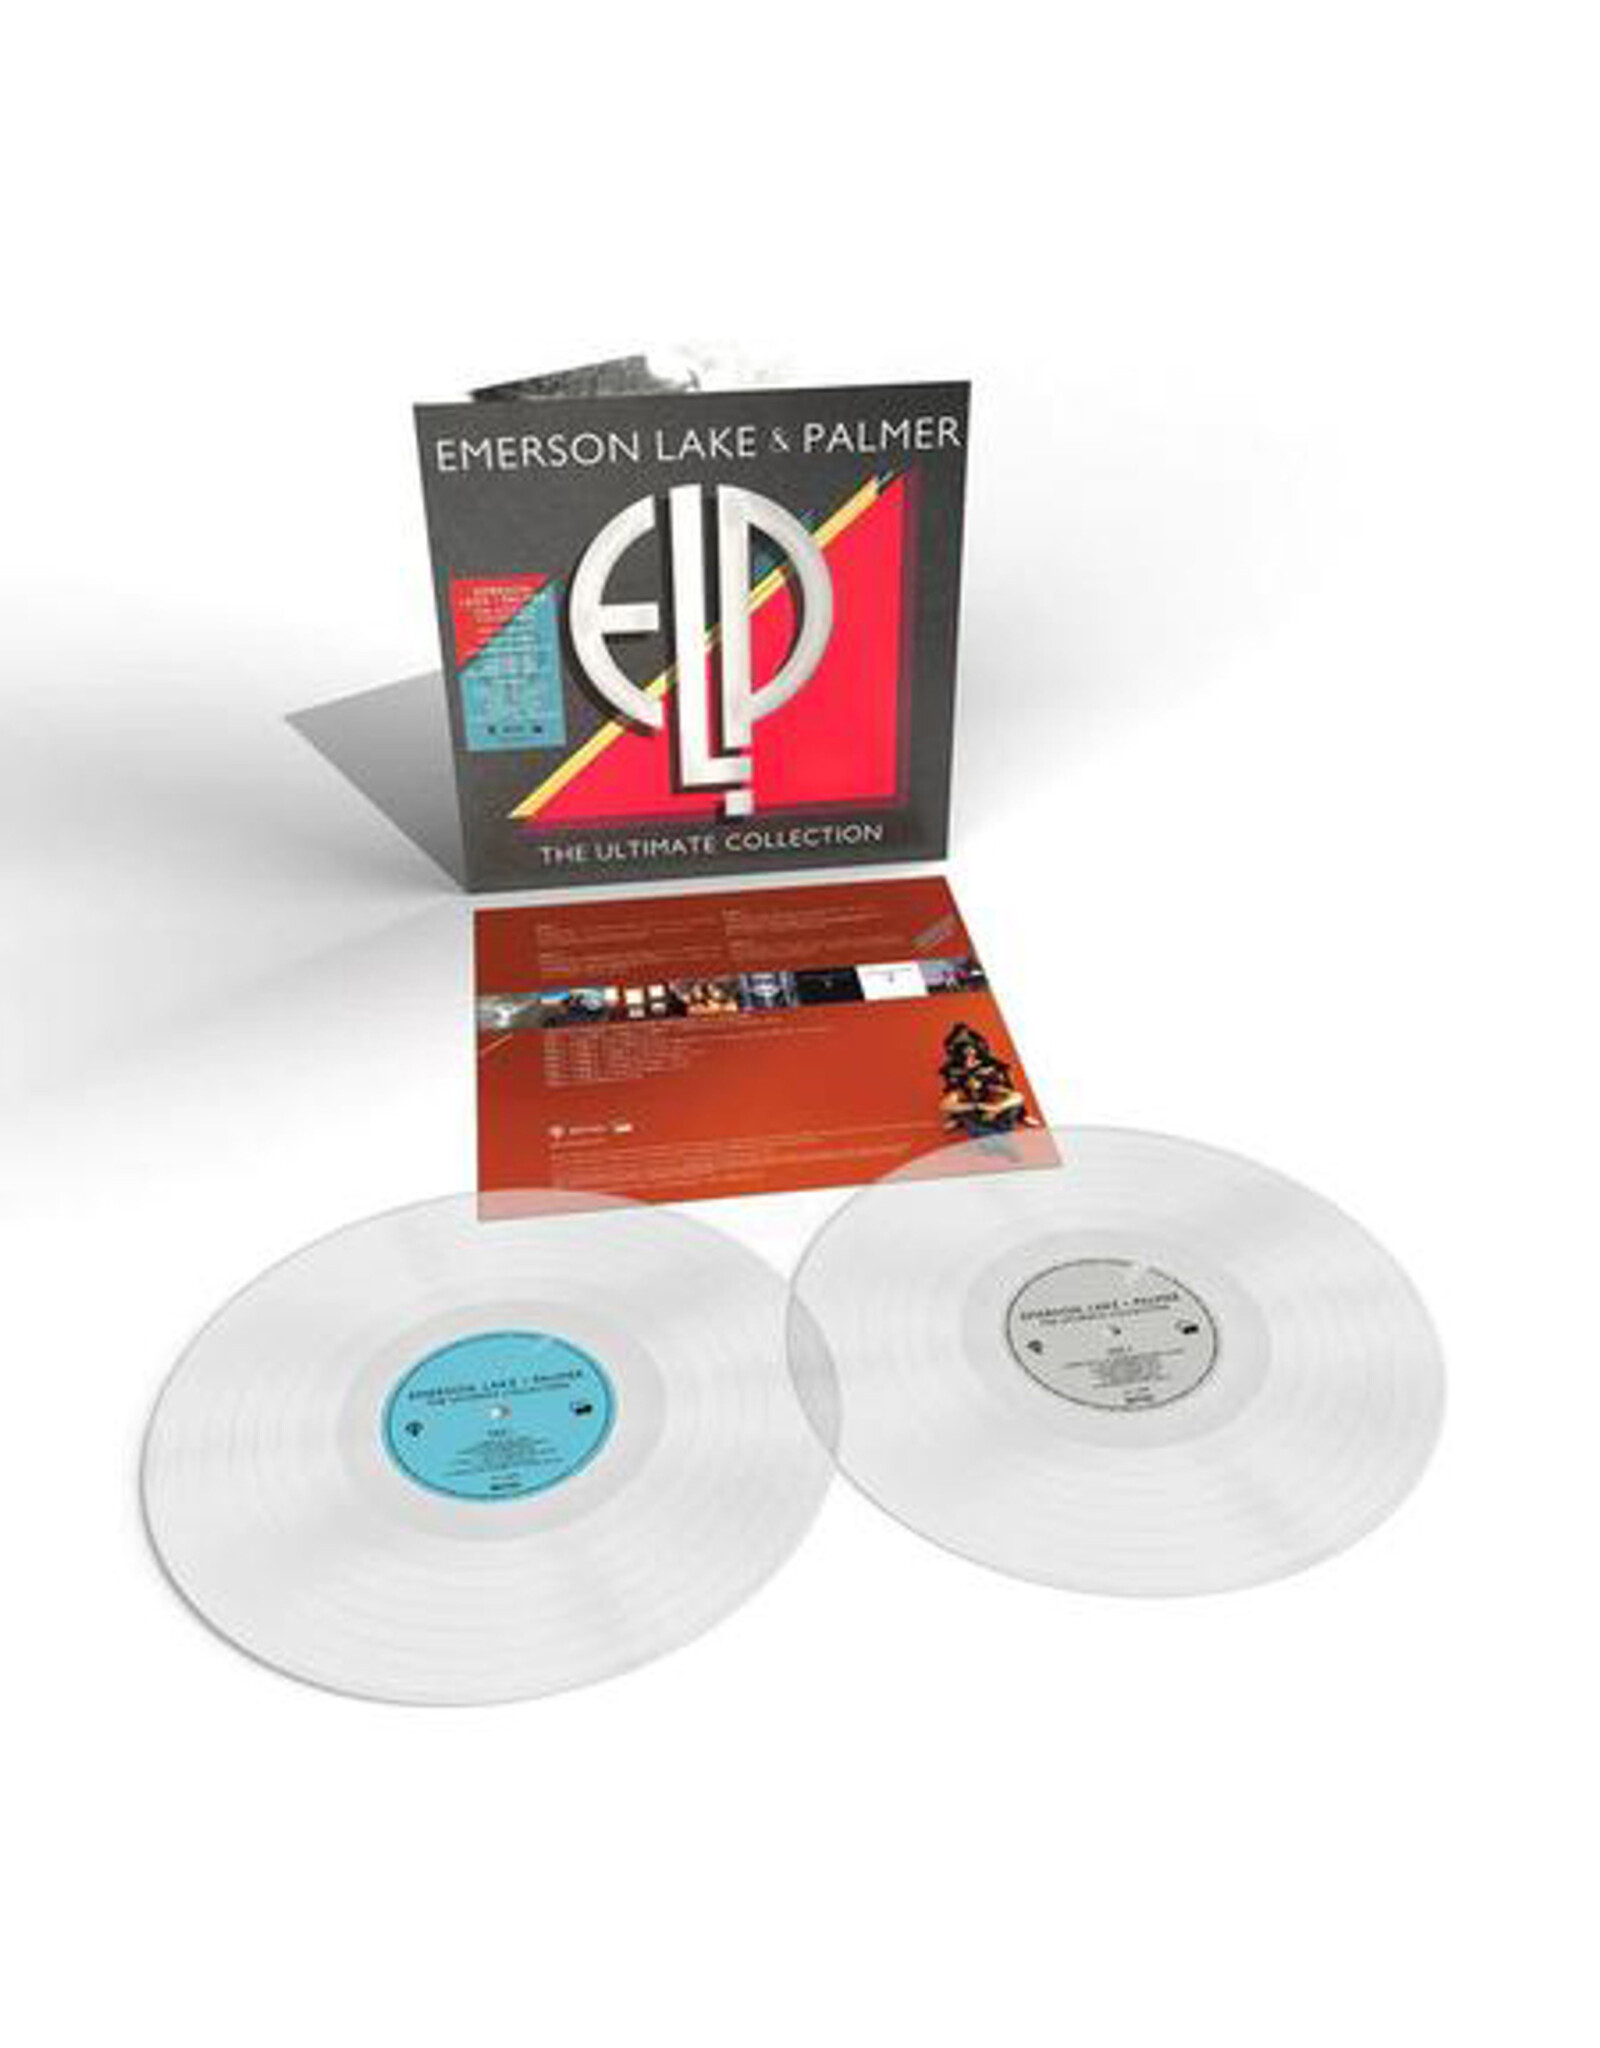 Emerson, Lake & Palmer - The Ultimate Collection (Clear Vinyl)